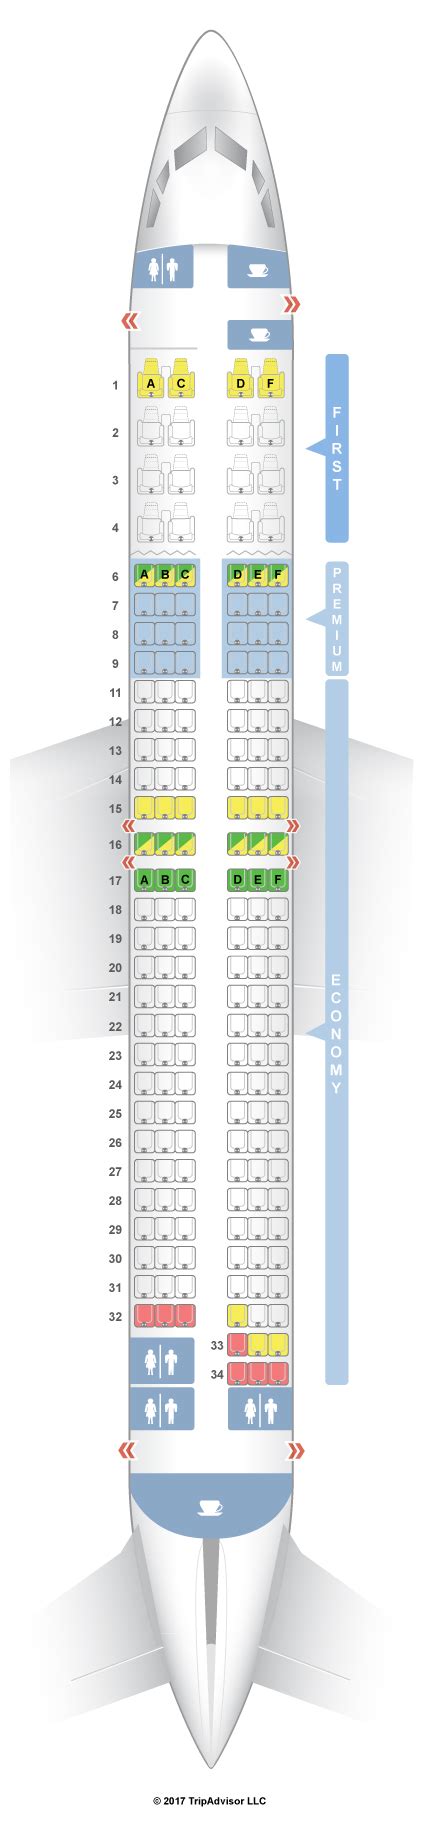  Click any seat for more information. Key. For your next Alaska Airlines flight, use this seating chart to get the most comfortable seats, legroom, and recline on . . 